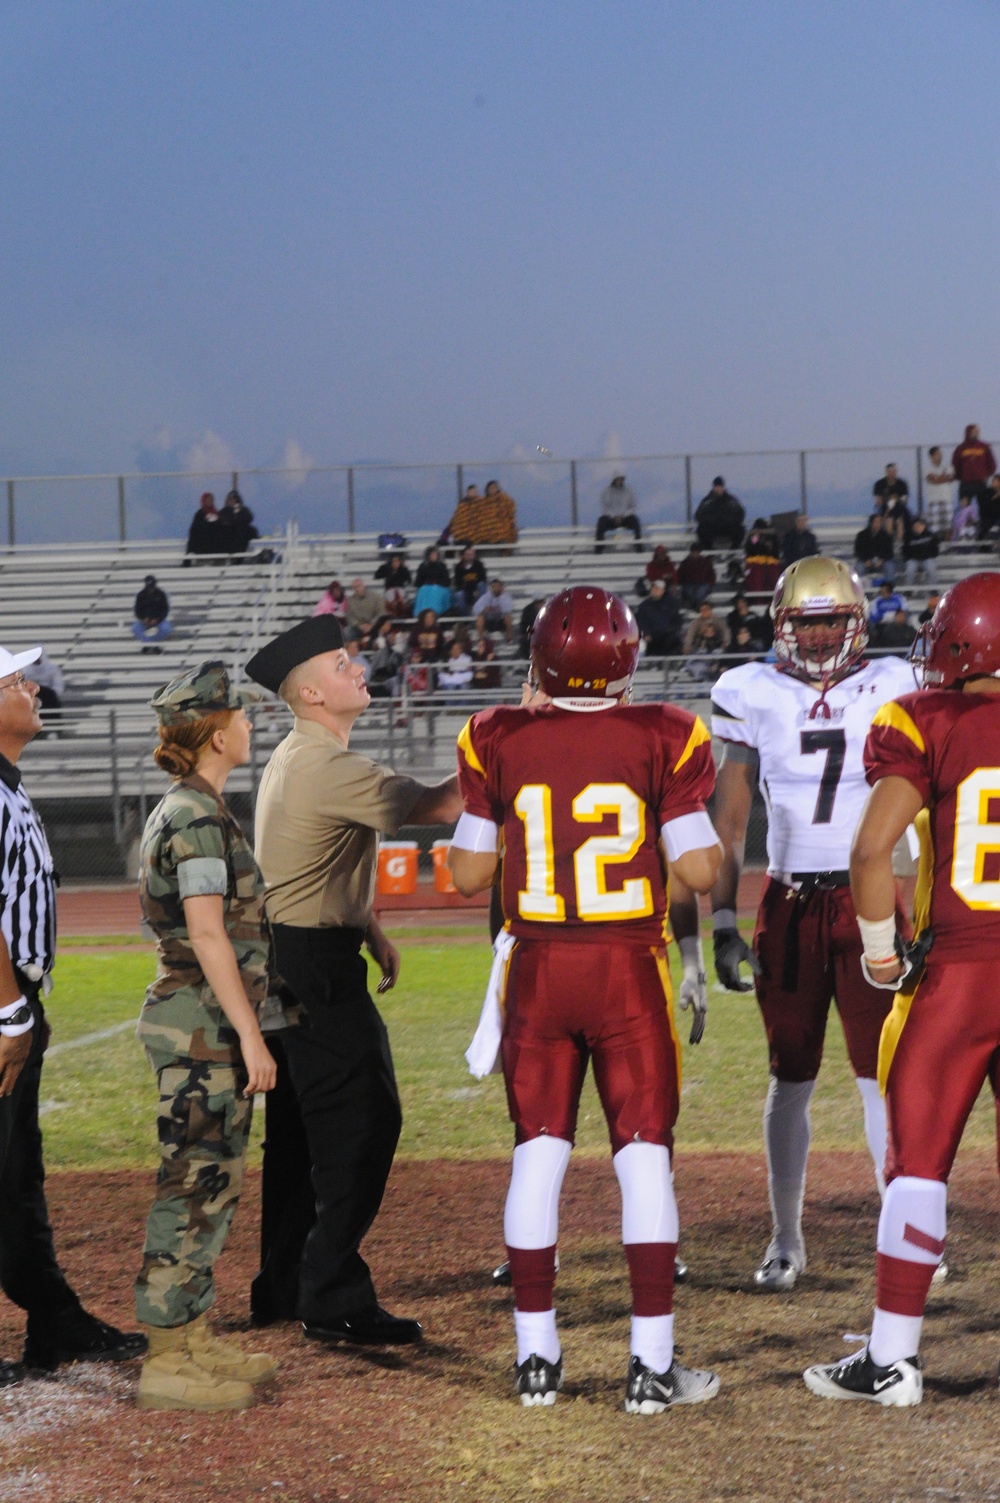 Seabee conduct high school game coin toss